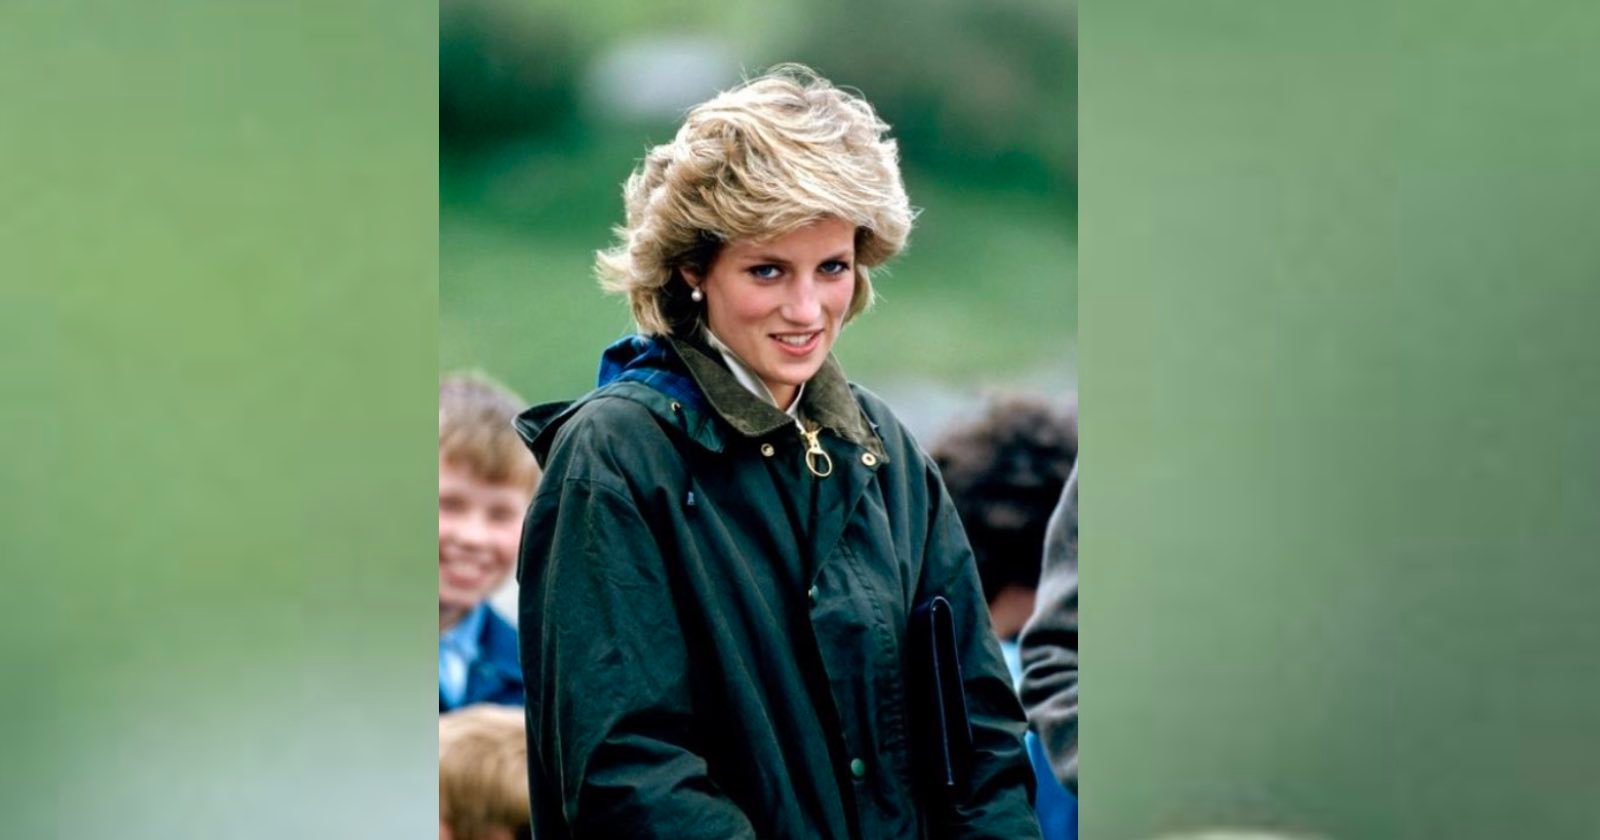 Royal Photographer Sues Clothing Store For Using Princess Diana Image